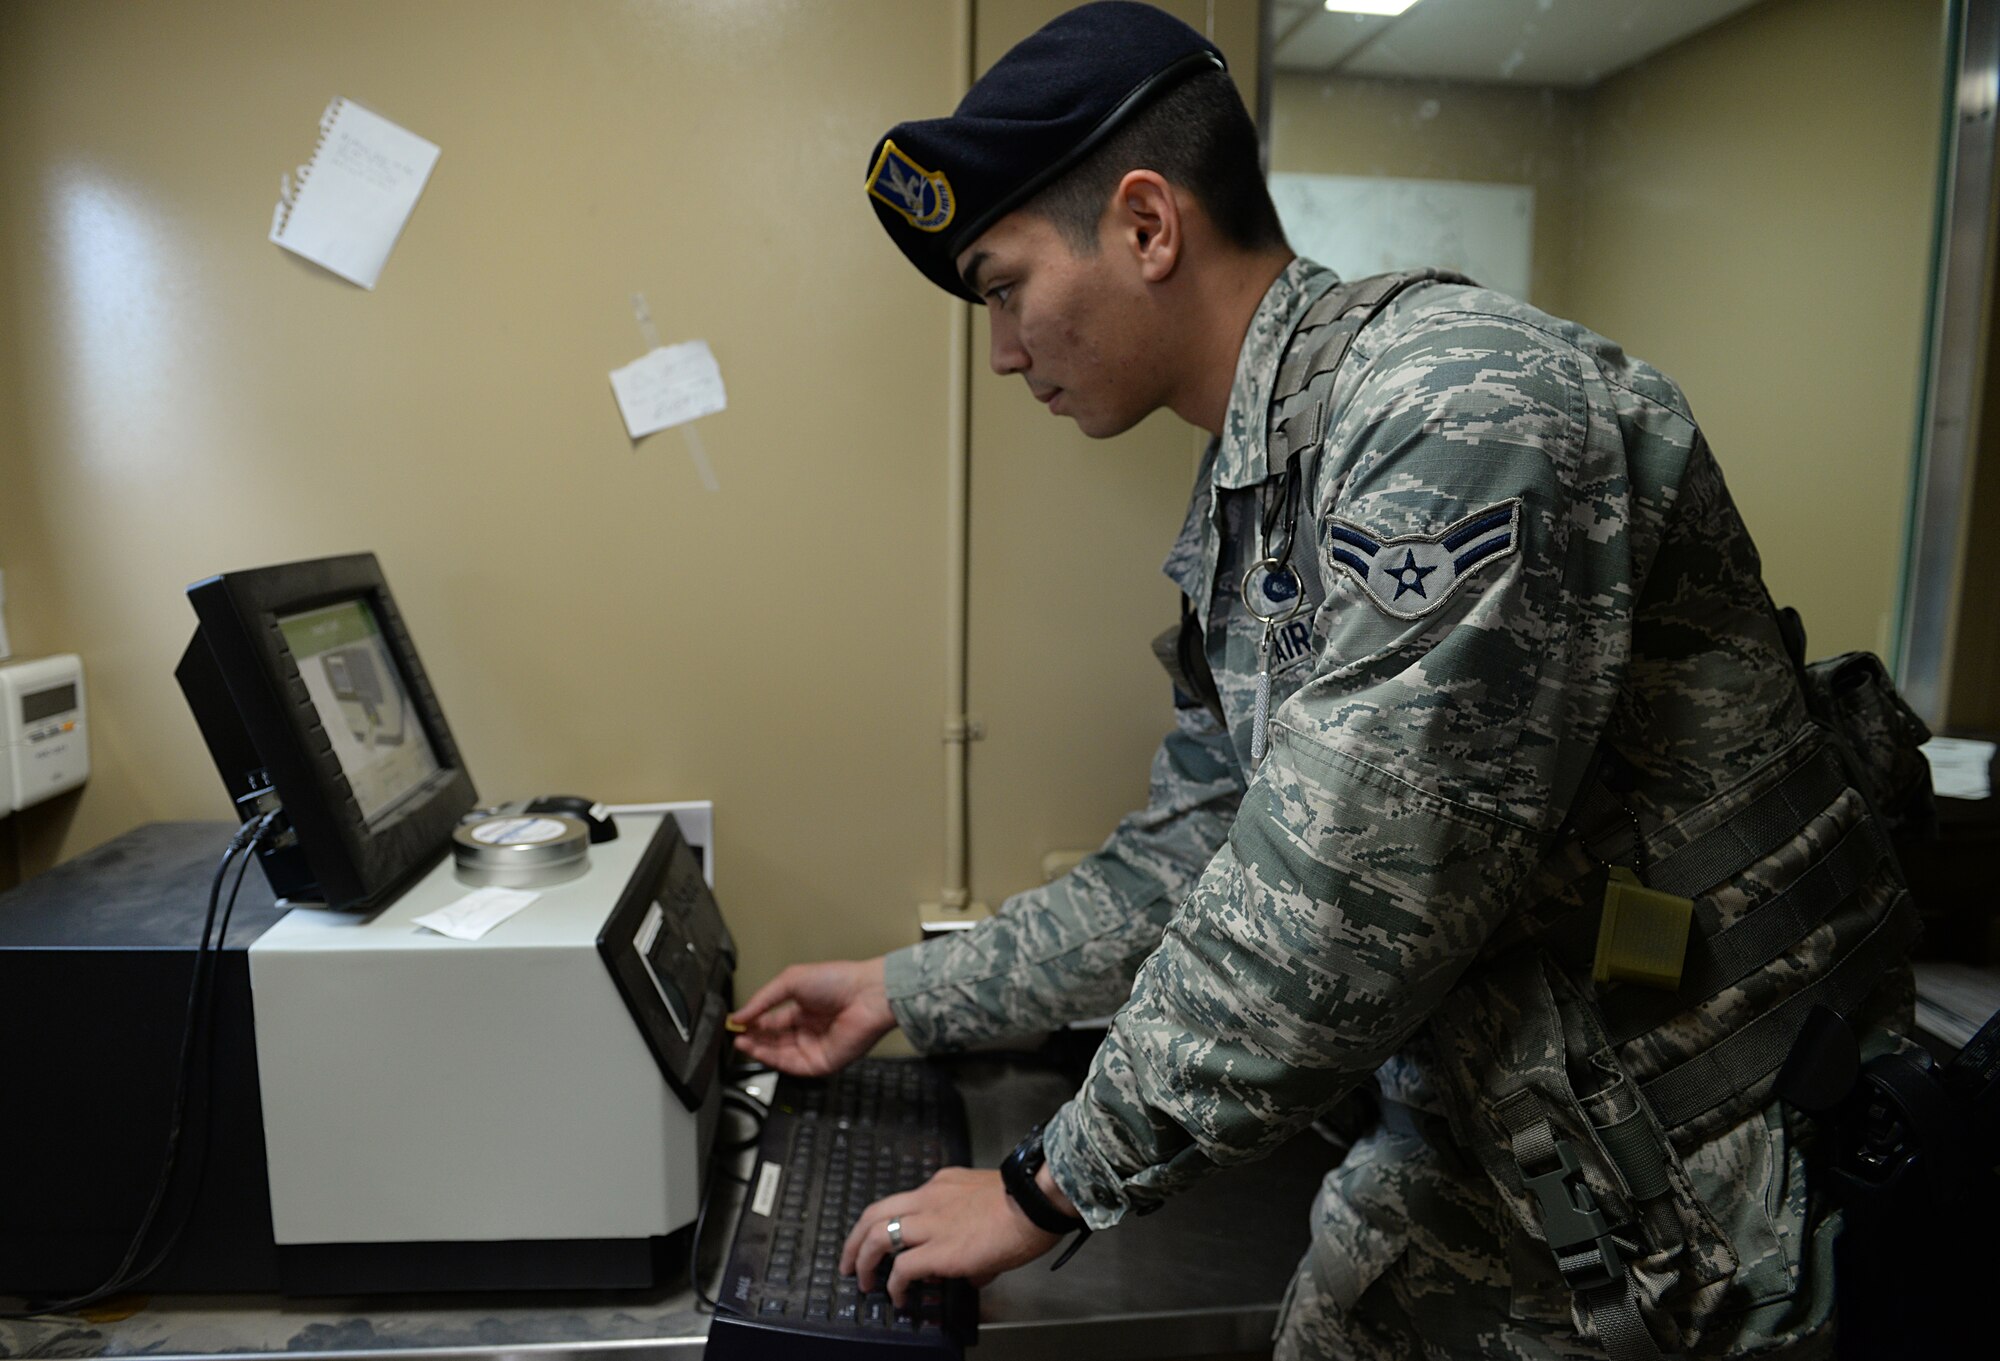 Airman 1st Class Scott Wilmot, 81st Security Forces Squadron commercial vehicle entry controller, uses explosive detection equipment to test for traces of explosives on vehicles entering the installation at the commercial vehicle entrance March 12, 2015, Keesler Air Force Base, Miss. 81st SFS Airmen perform multiple roles to keep members of Keesler safe, ranging from identification checks at base entrances to searching for explosives and narcotics with military working dogs. (U.S. Air Force photo by Senior Airman Holly Mansfield)